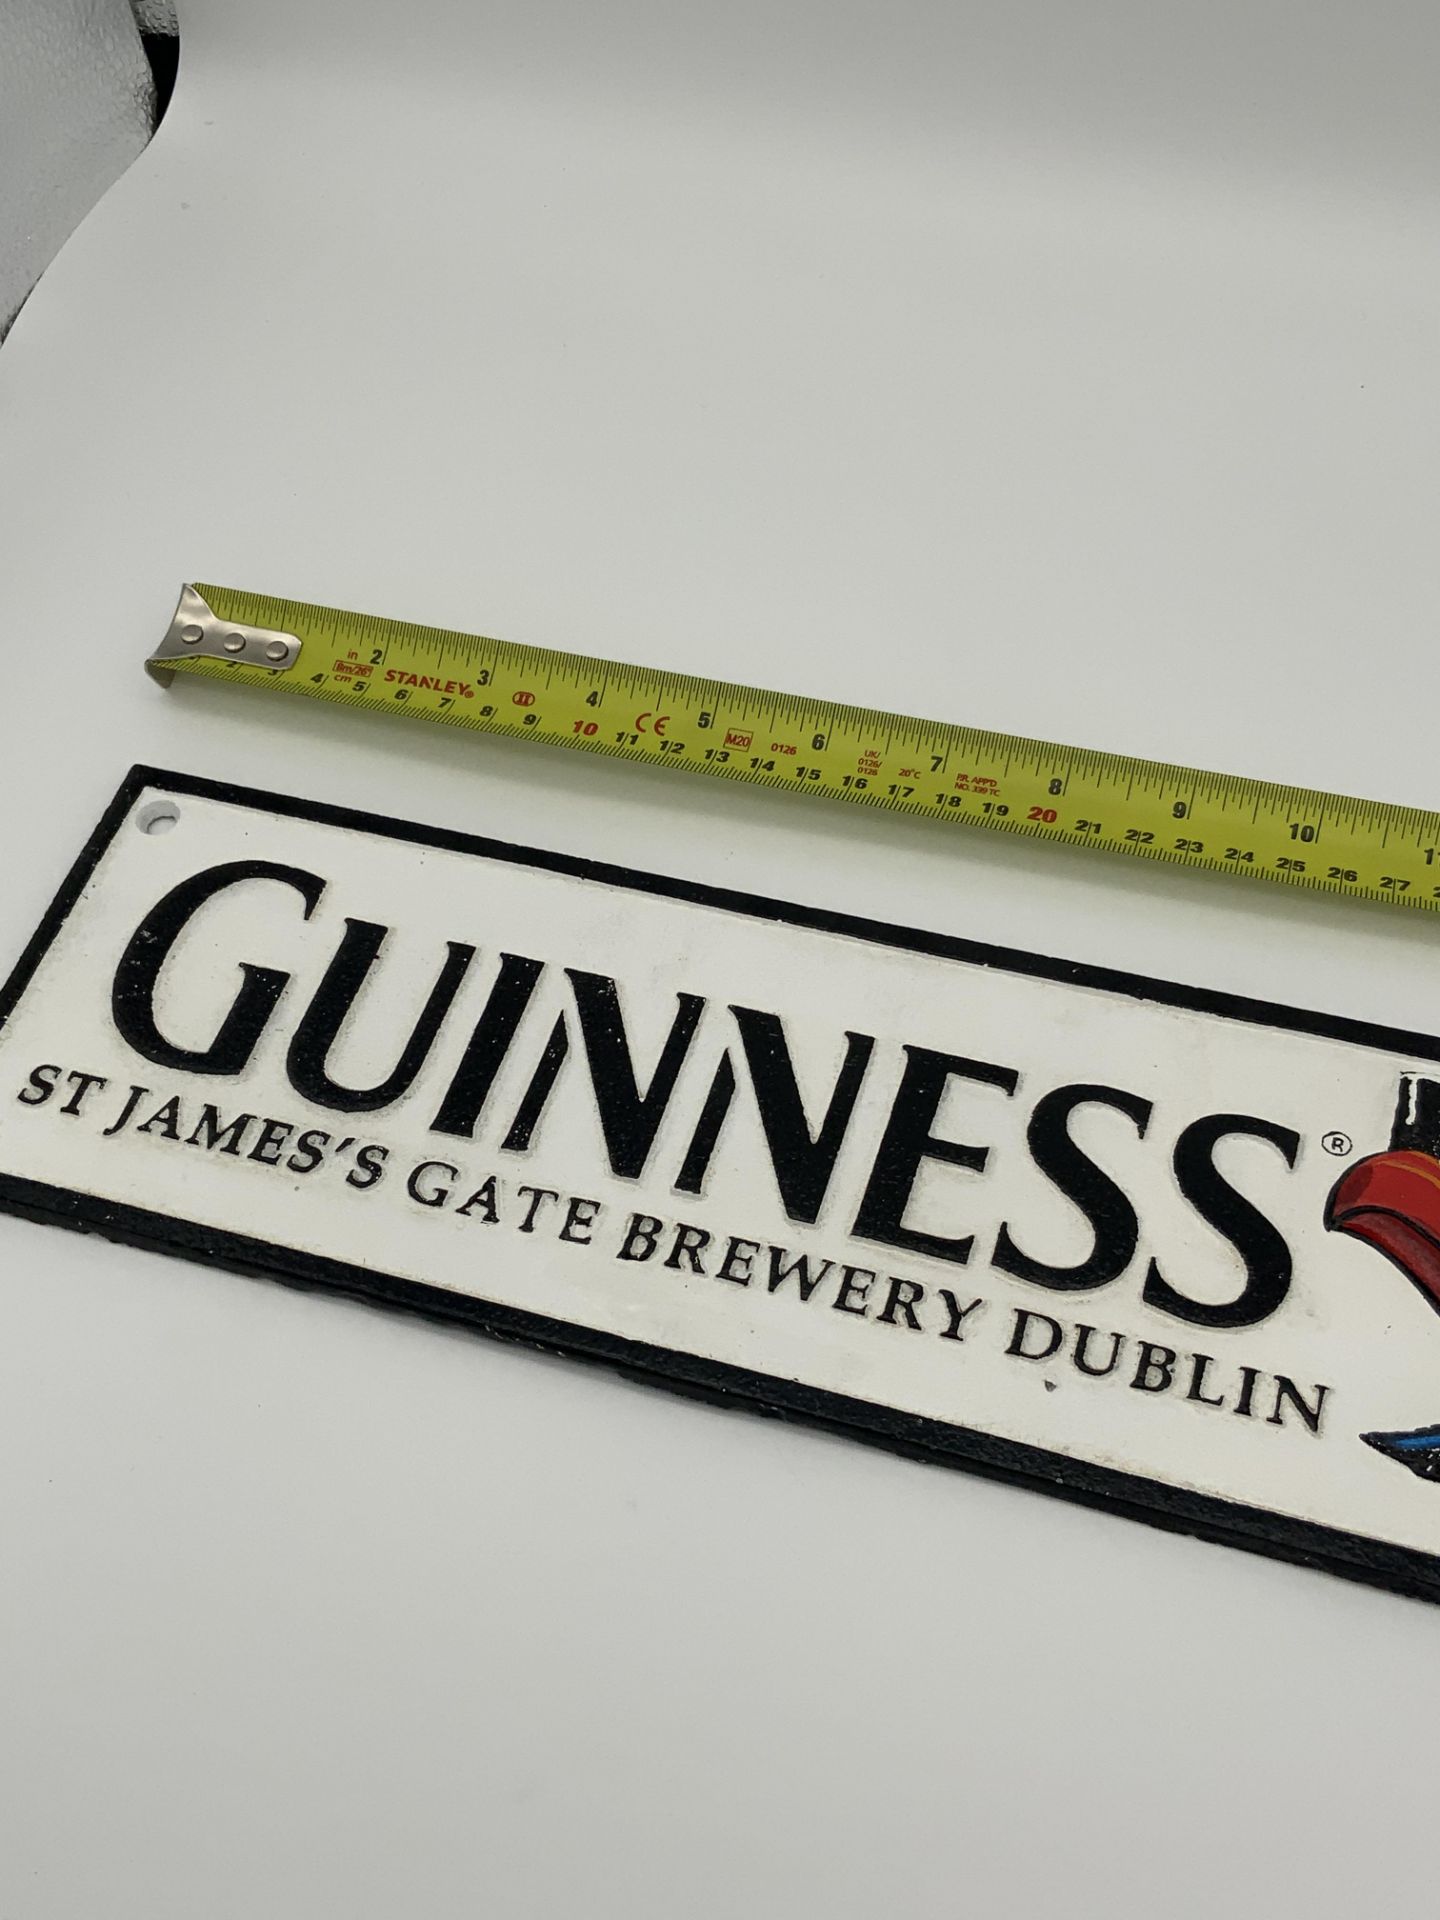 CAST IRON GUINNESS SIGN - Image 2 of 3